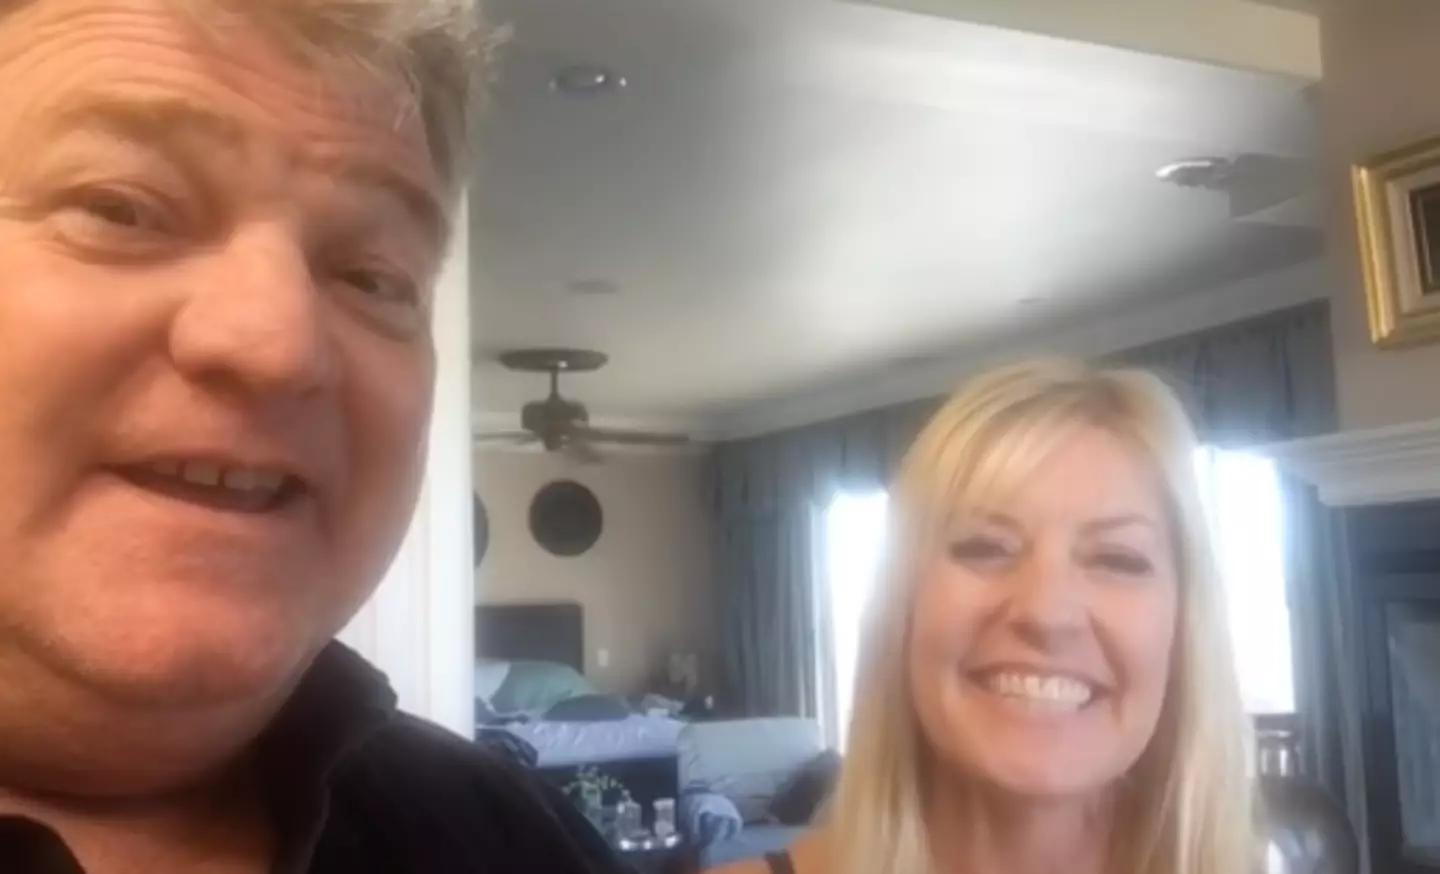 Storage Wars host Dan Dotson and his co-star and wife Laura were left bamboozled when they heard the news.